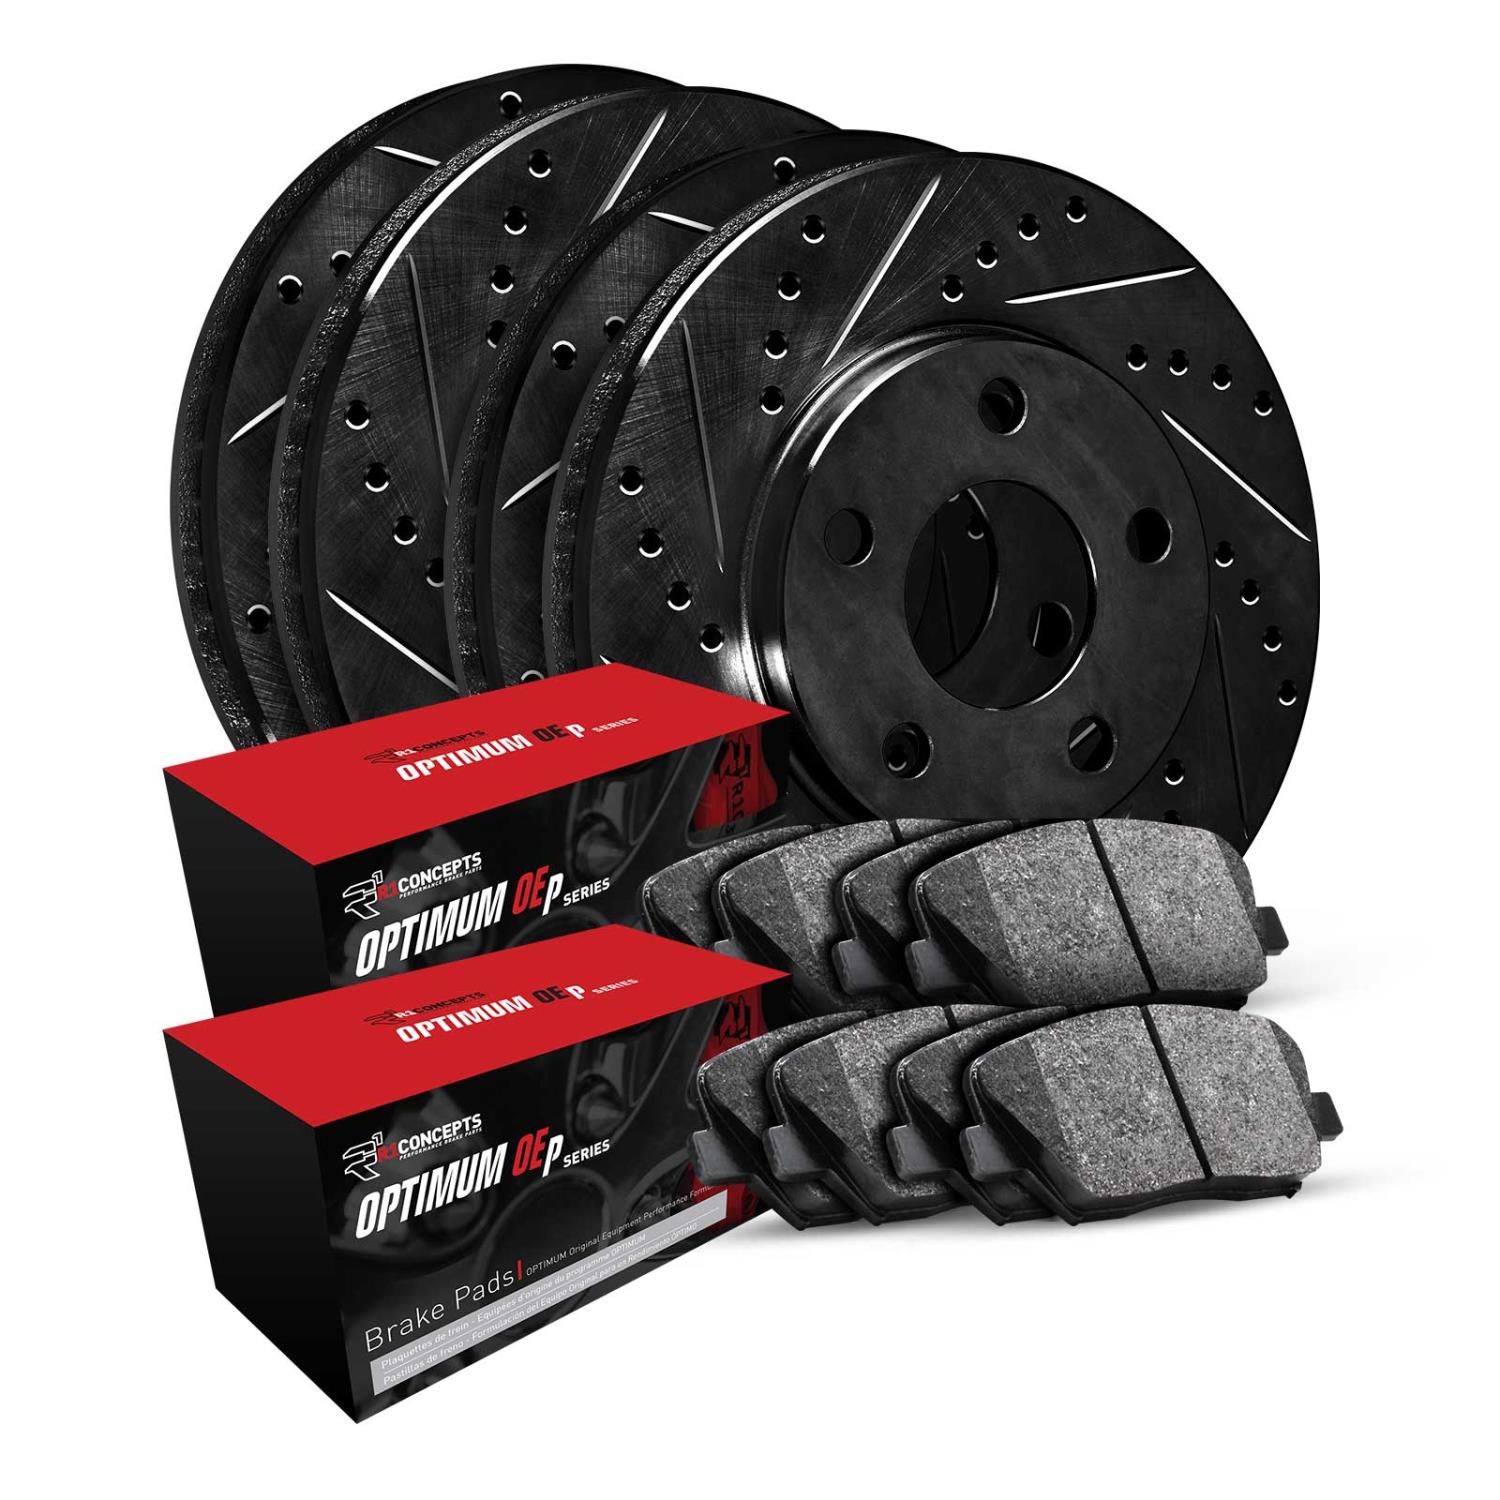 E-Line Drilled & Slotted Black Brake Rotor & Drum Set w/Optimum OE Pads & Shoes, 2016-2020 Fits Multiple Makes/Models